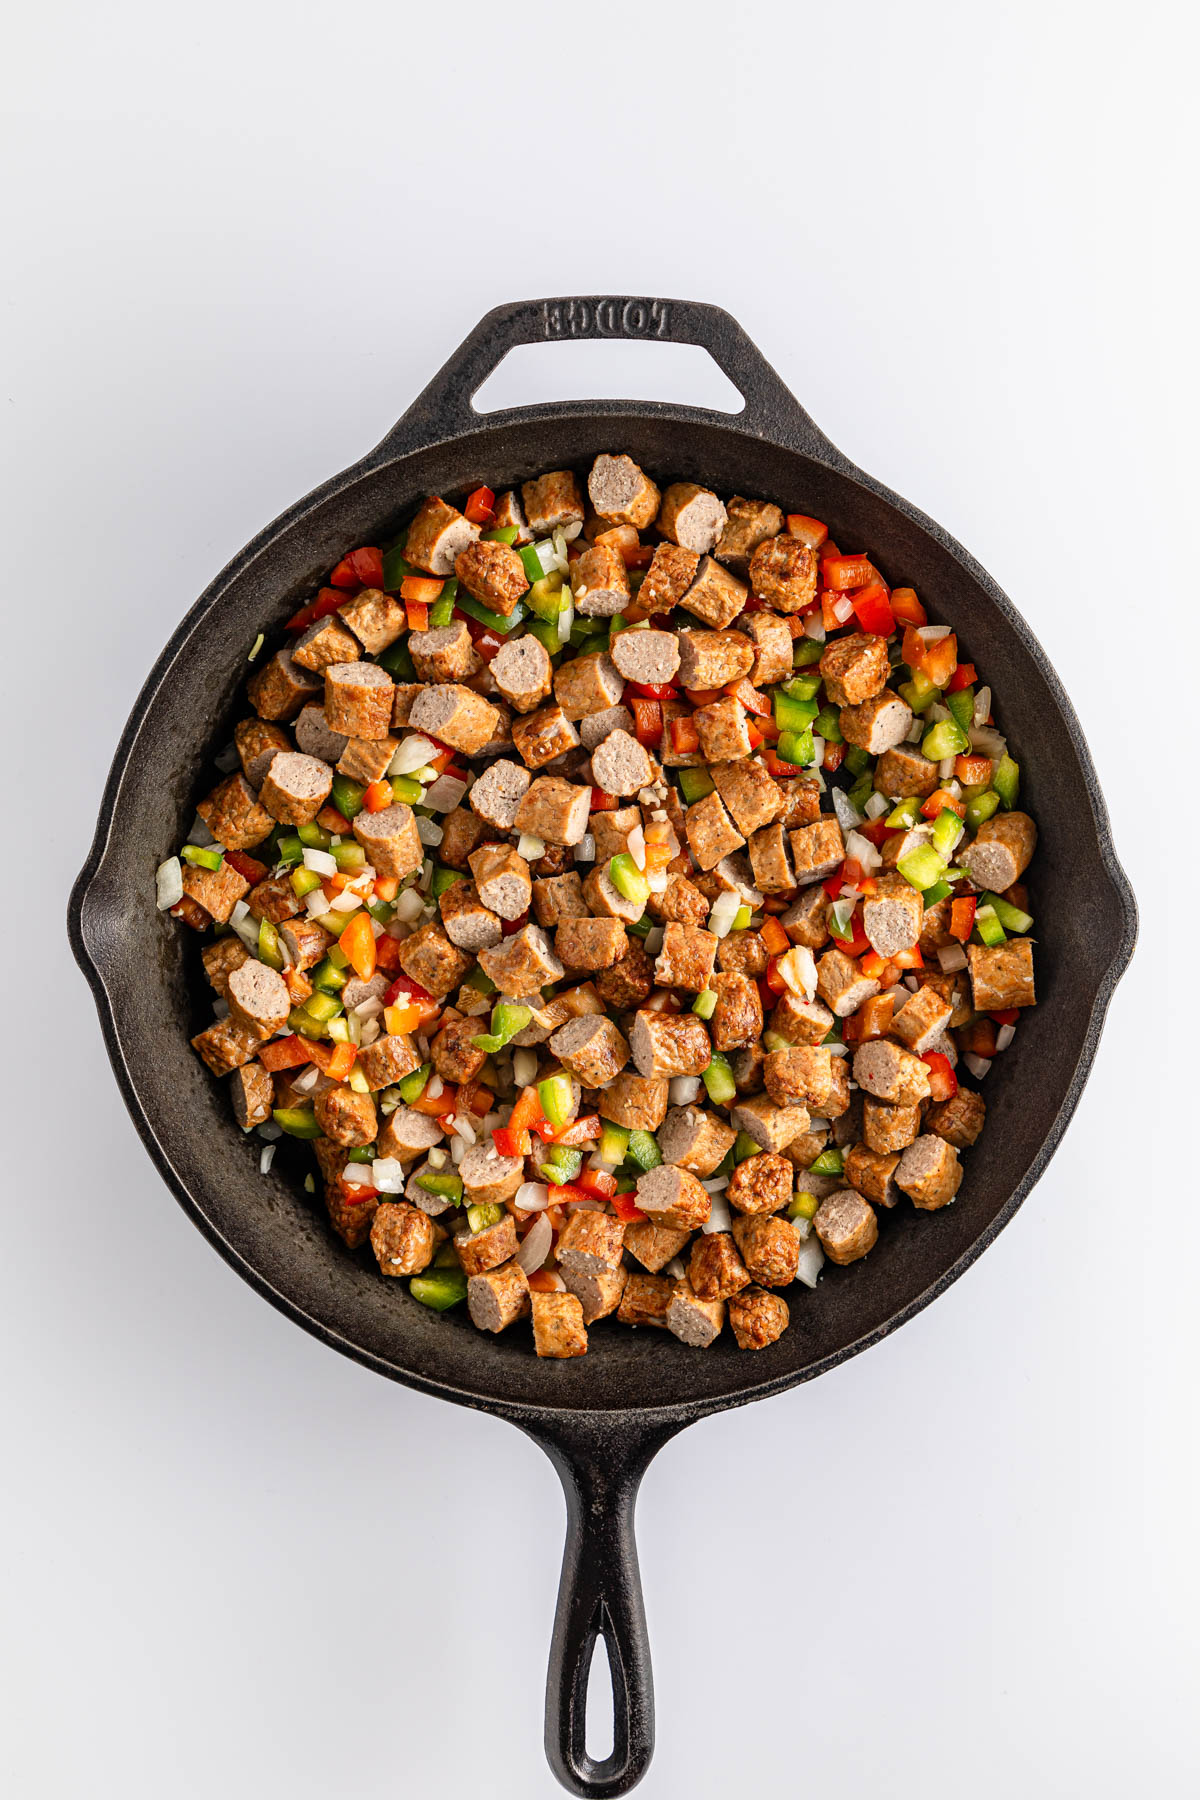 Diced vegetables and tofu cooking in a cast-iron skillet.